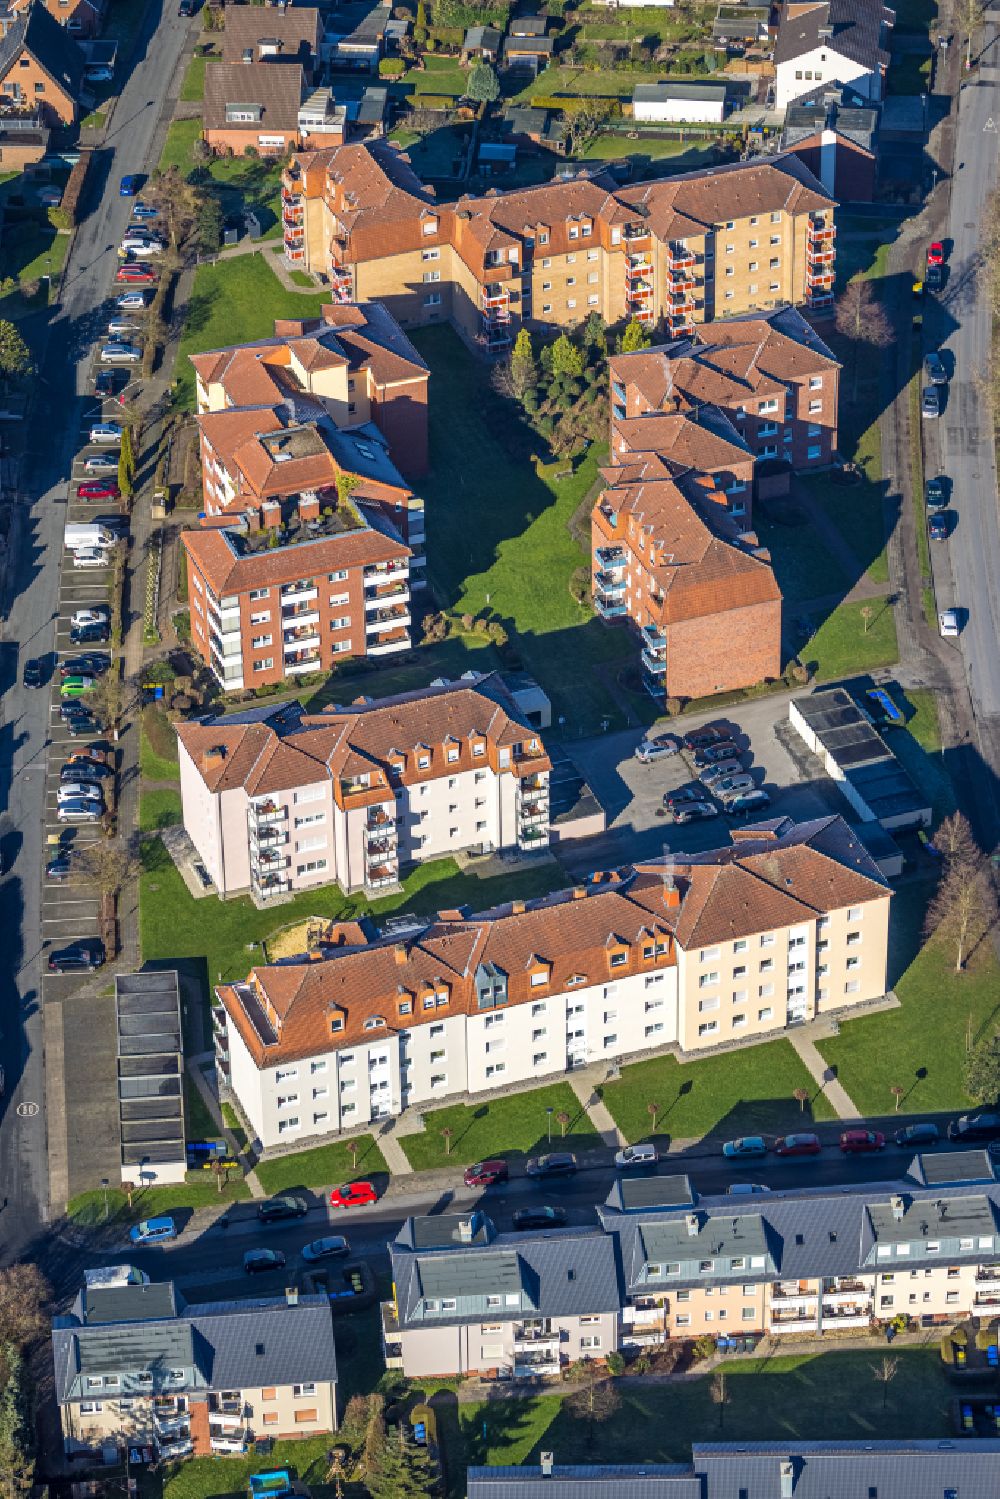 Werne from the bird's eye view: Residential area of the multi-family house settlement on the Humboldtstrasse - Schlaunstrasse in Werne in the state North Rhine-Westphalia, Germany